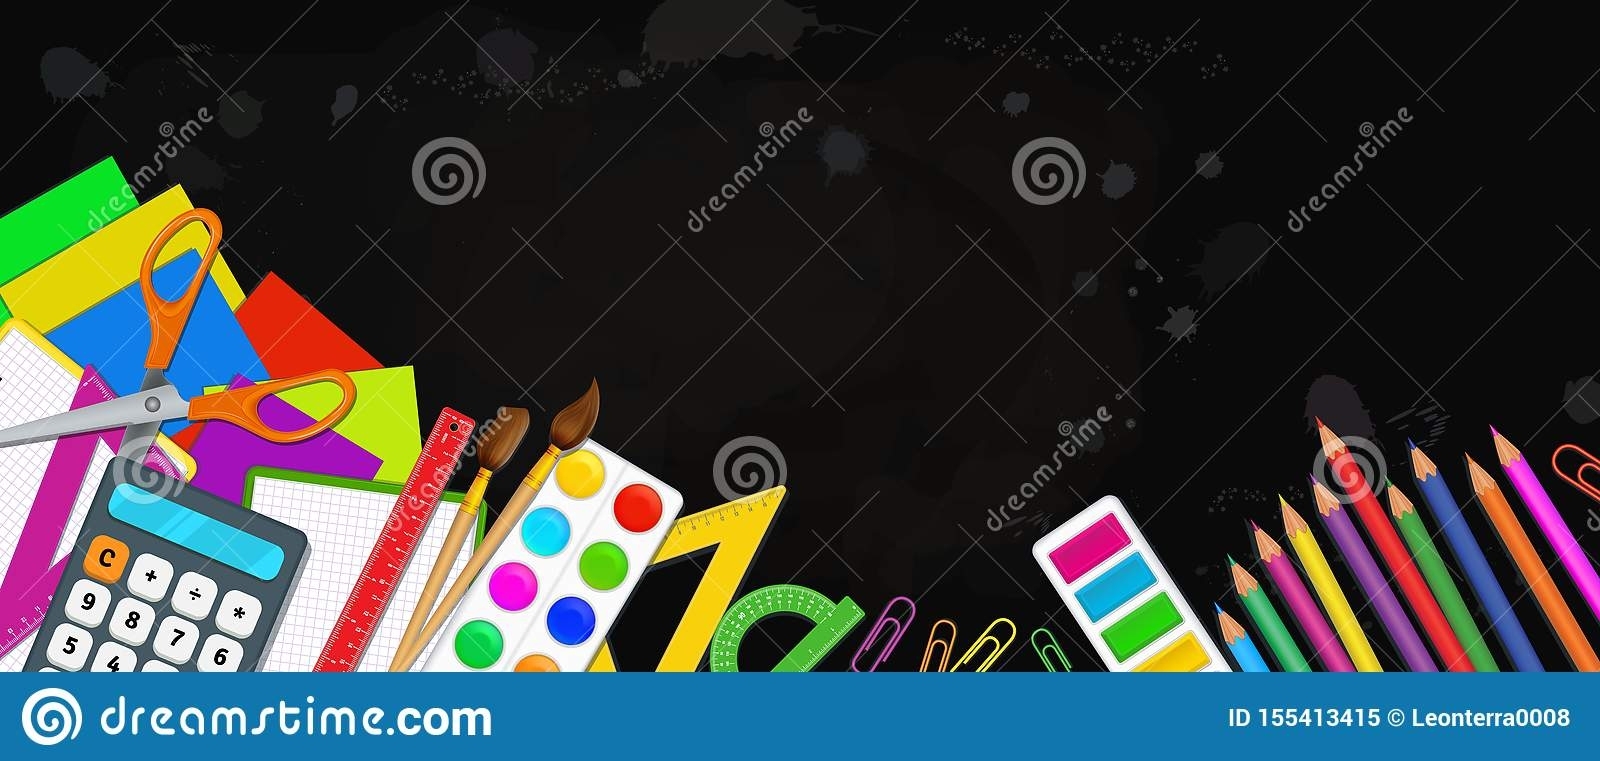 Back To School Education Banner Template With Colorful School Supplies with Classroom Banner Template